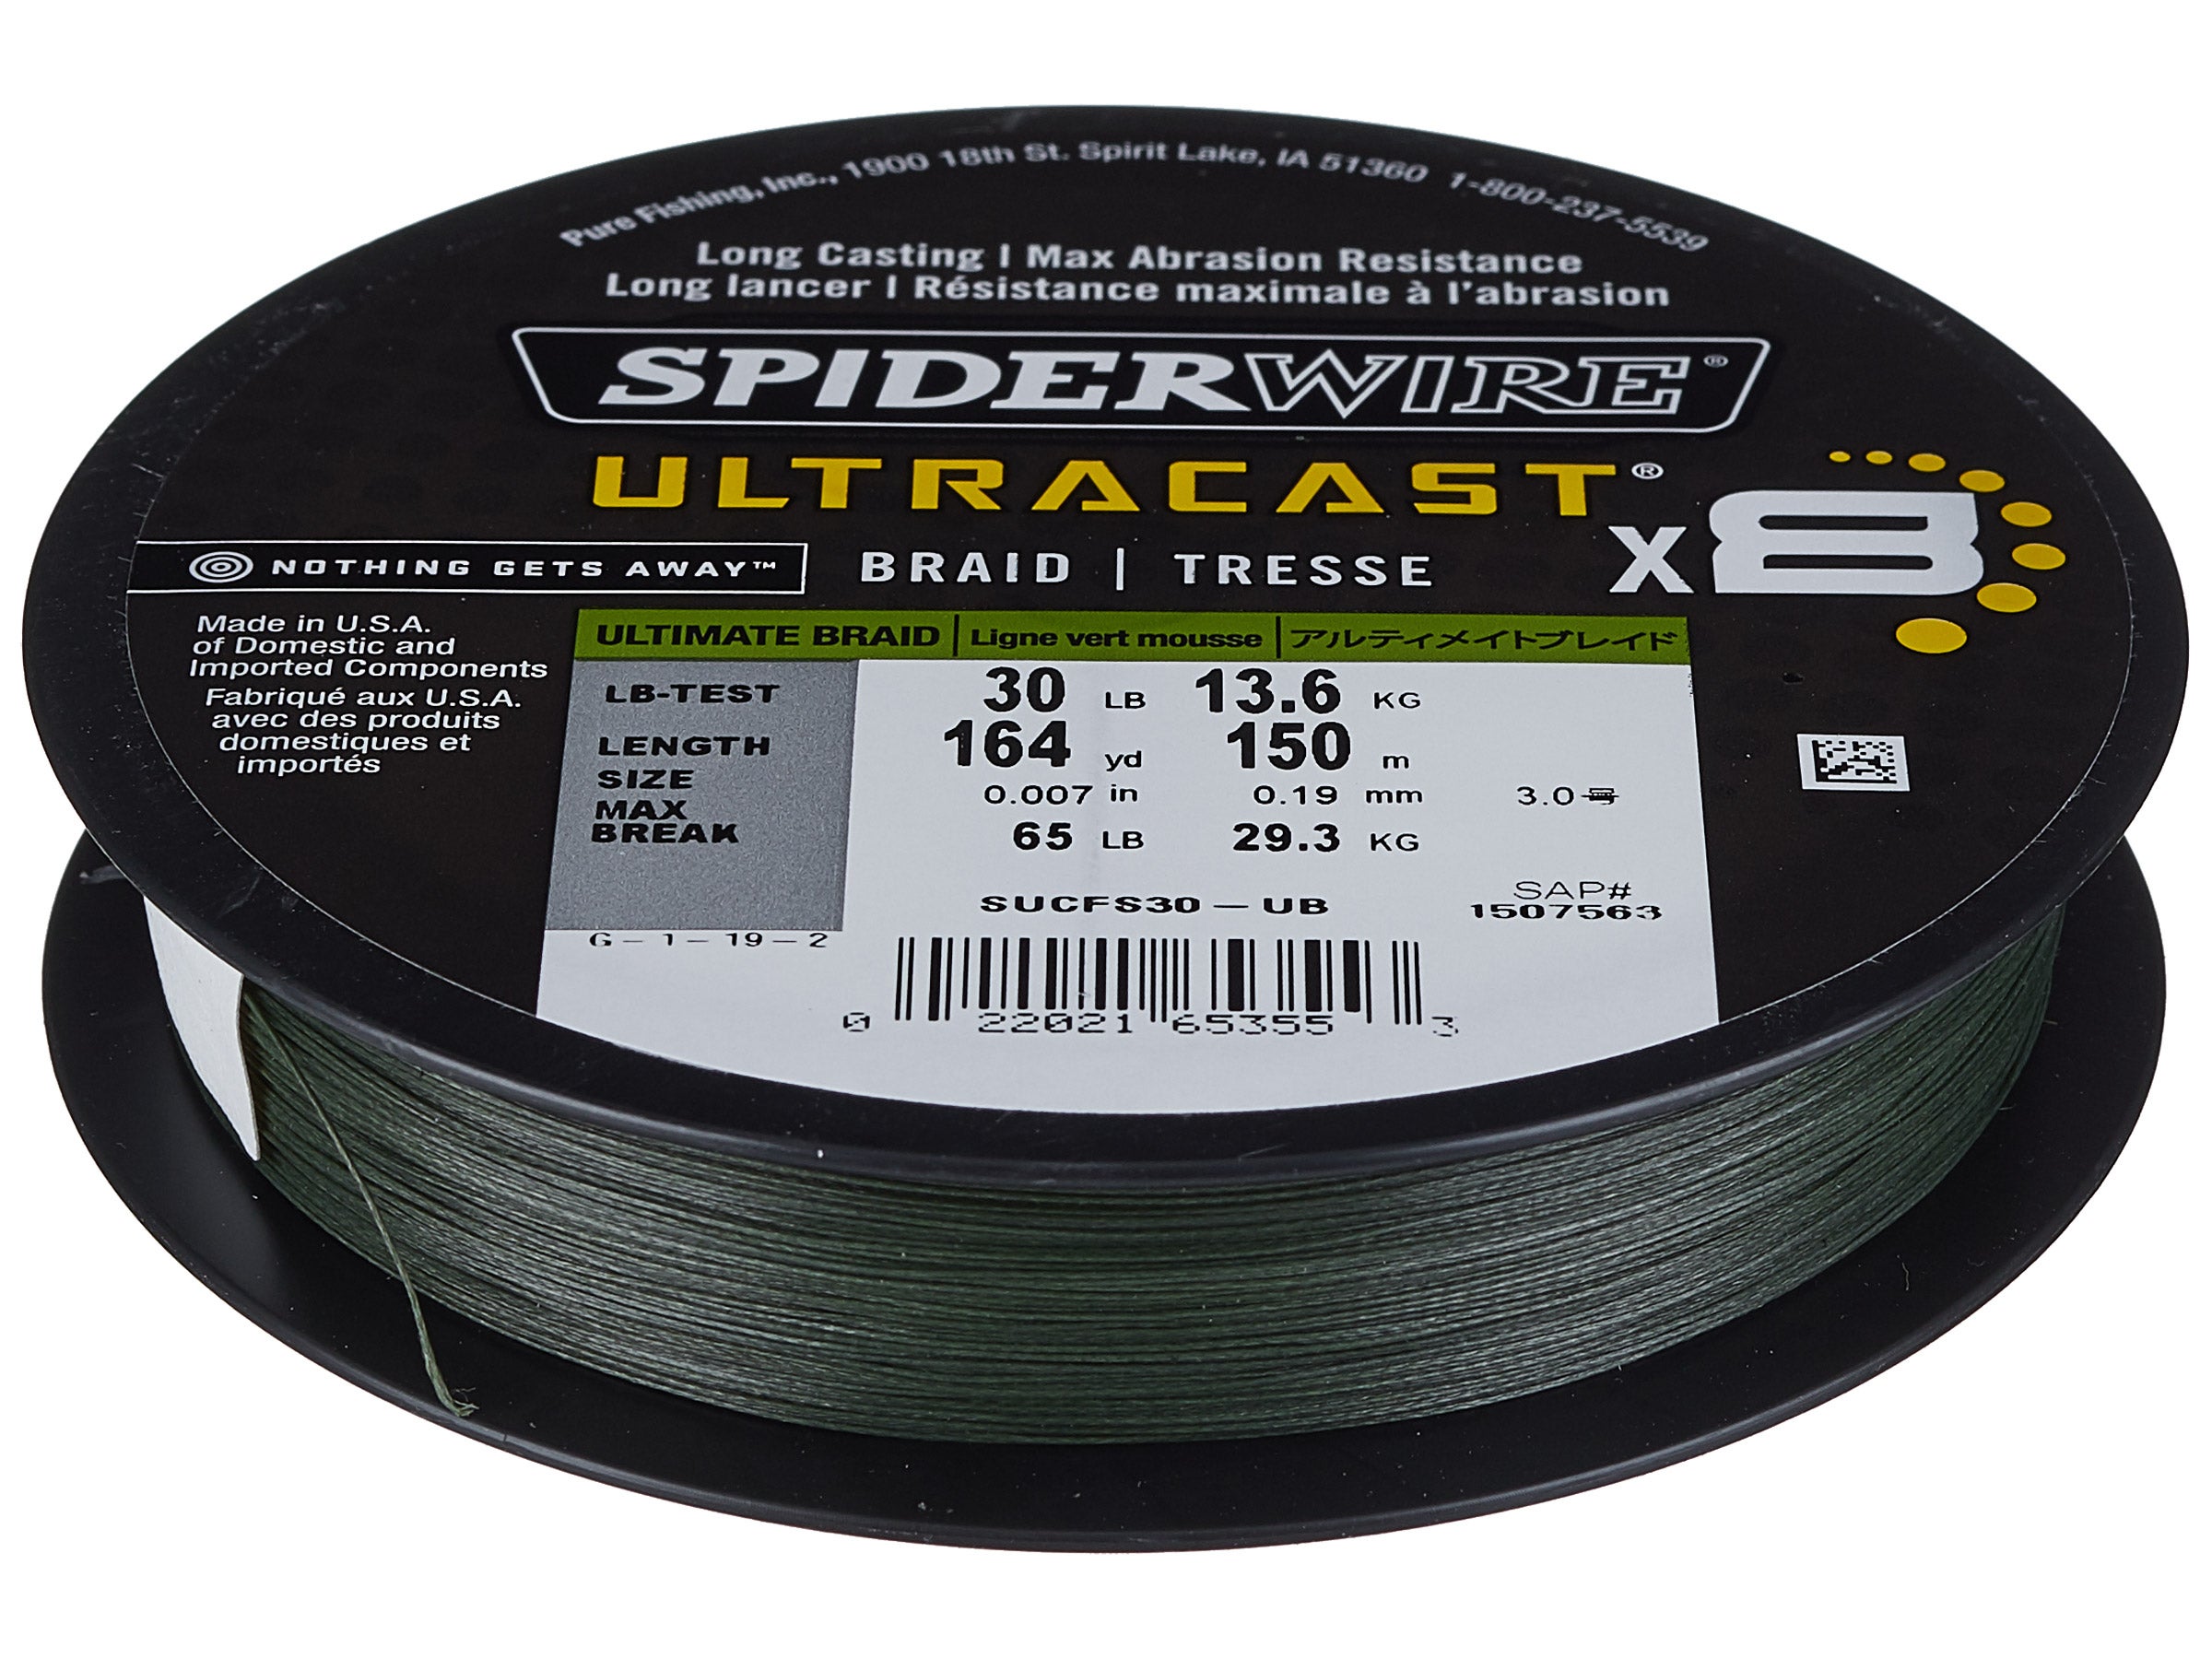 Spiderwire Ultracast X8 Long Casting 30lb 164yd 